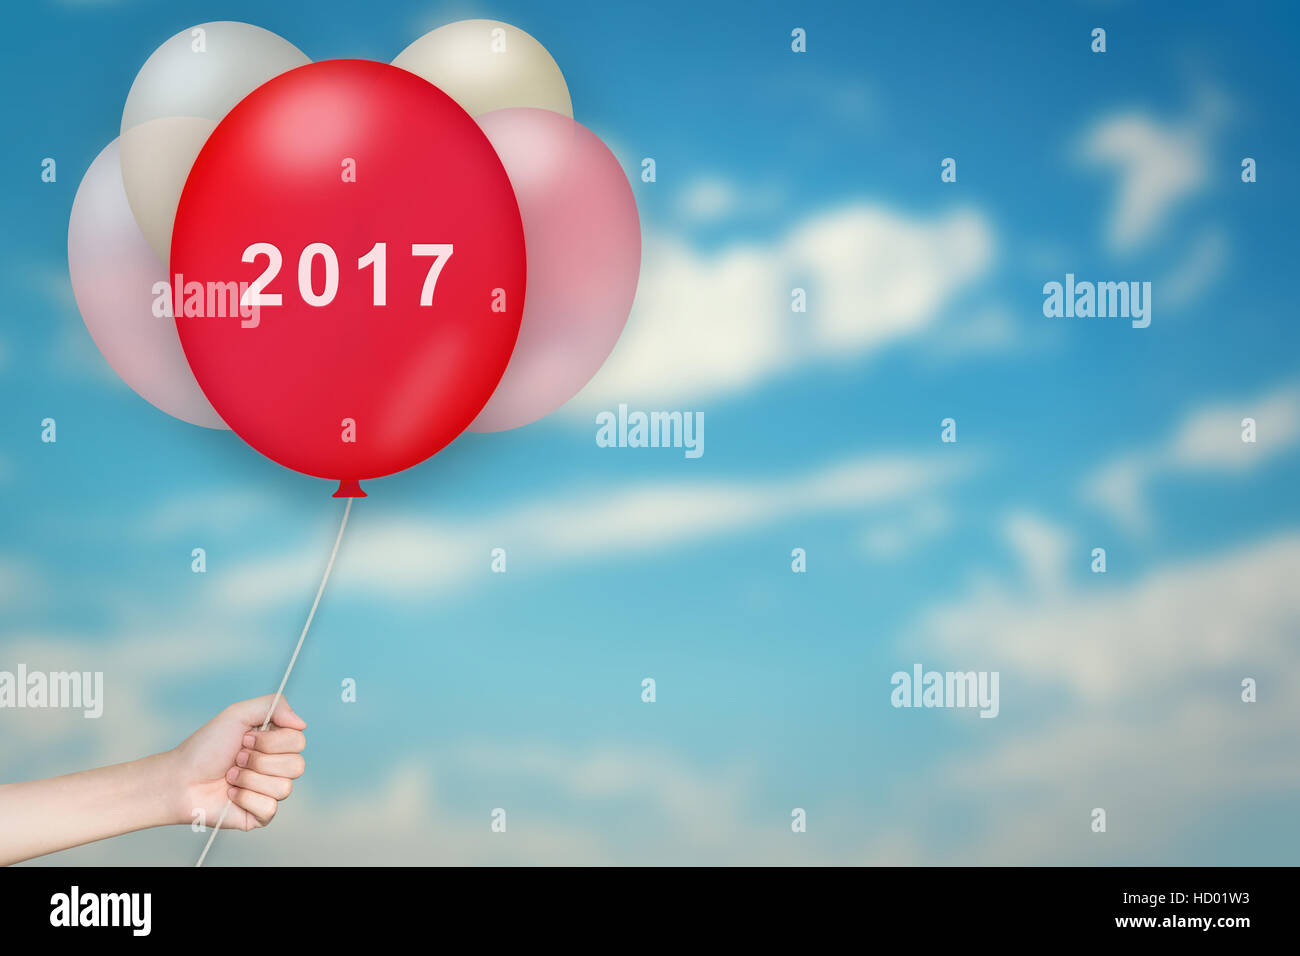 Hand Holding 2017 Balloon with sky blurred background Stock Photo